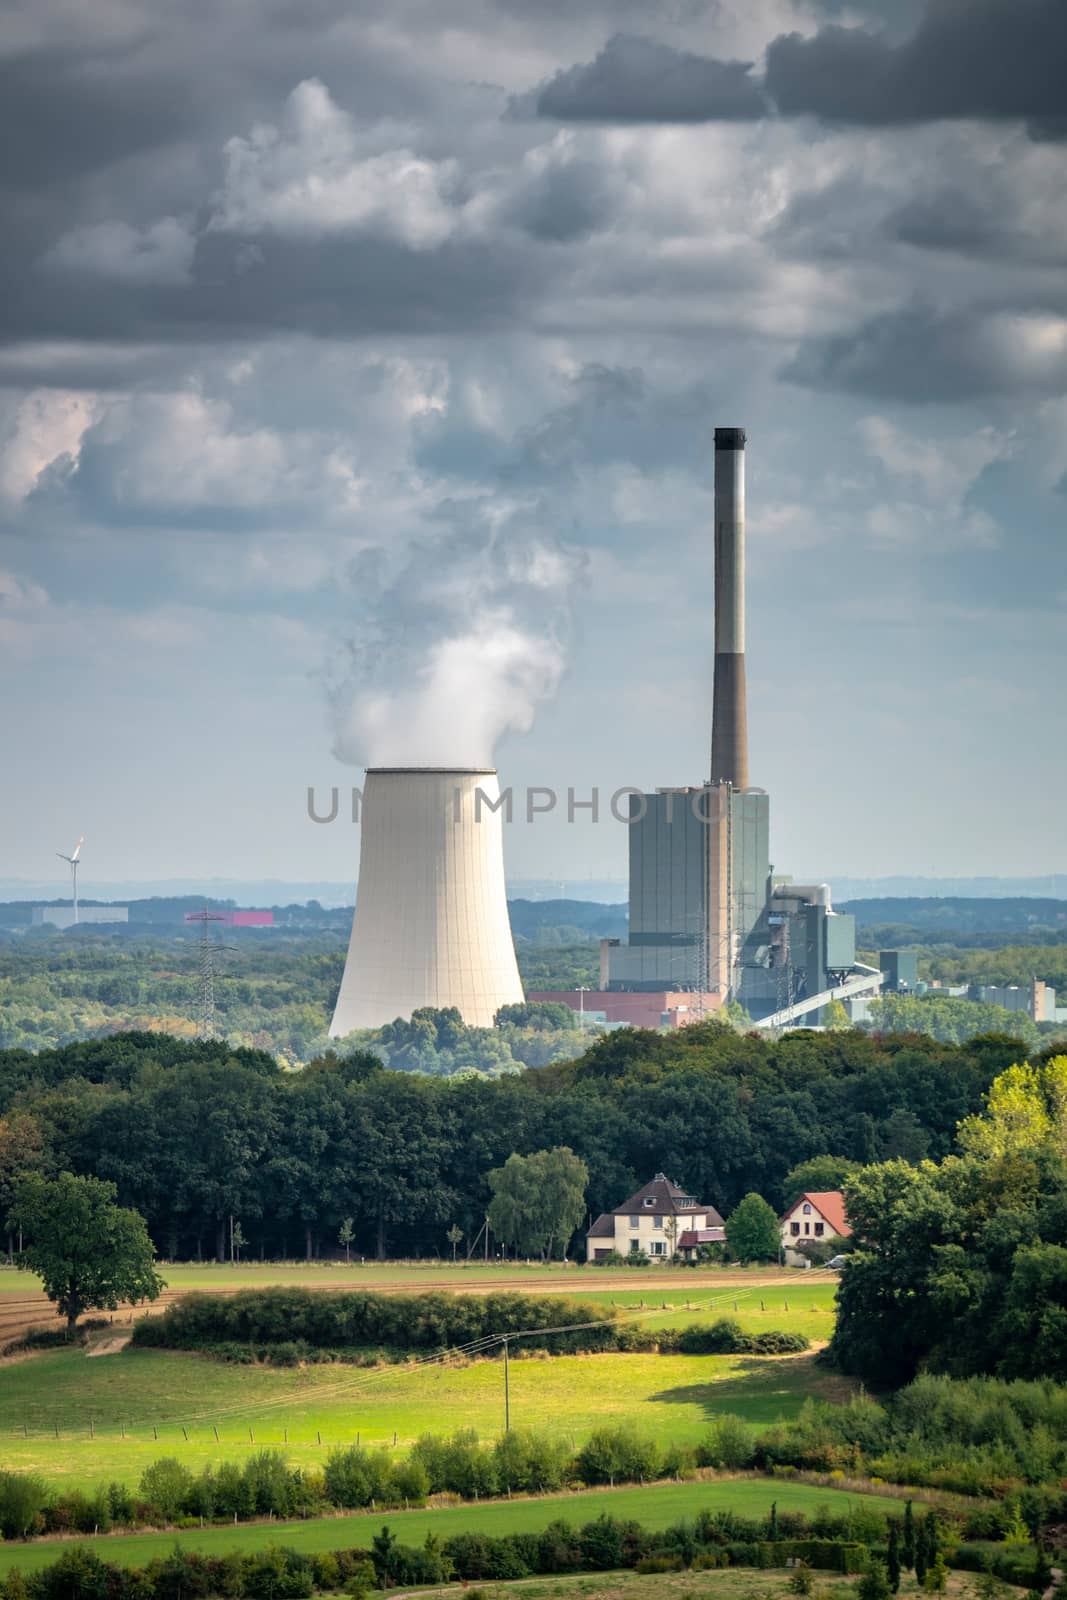 An image of a cooling tower in Germany